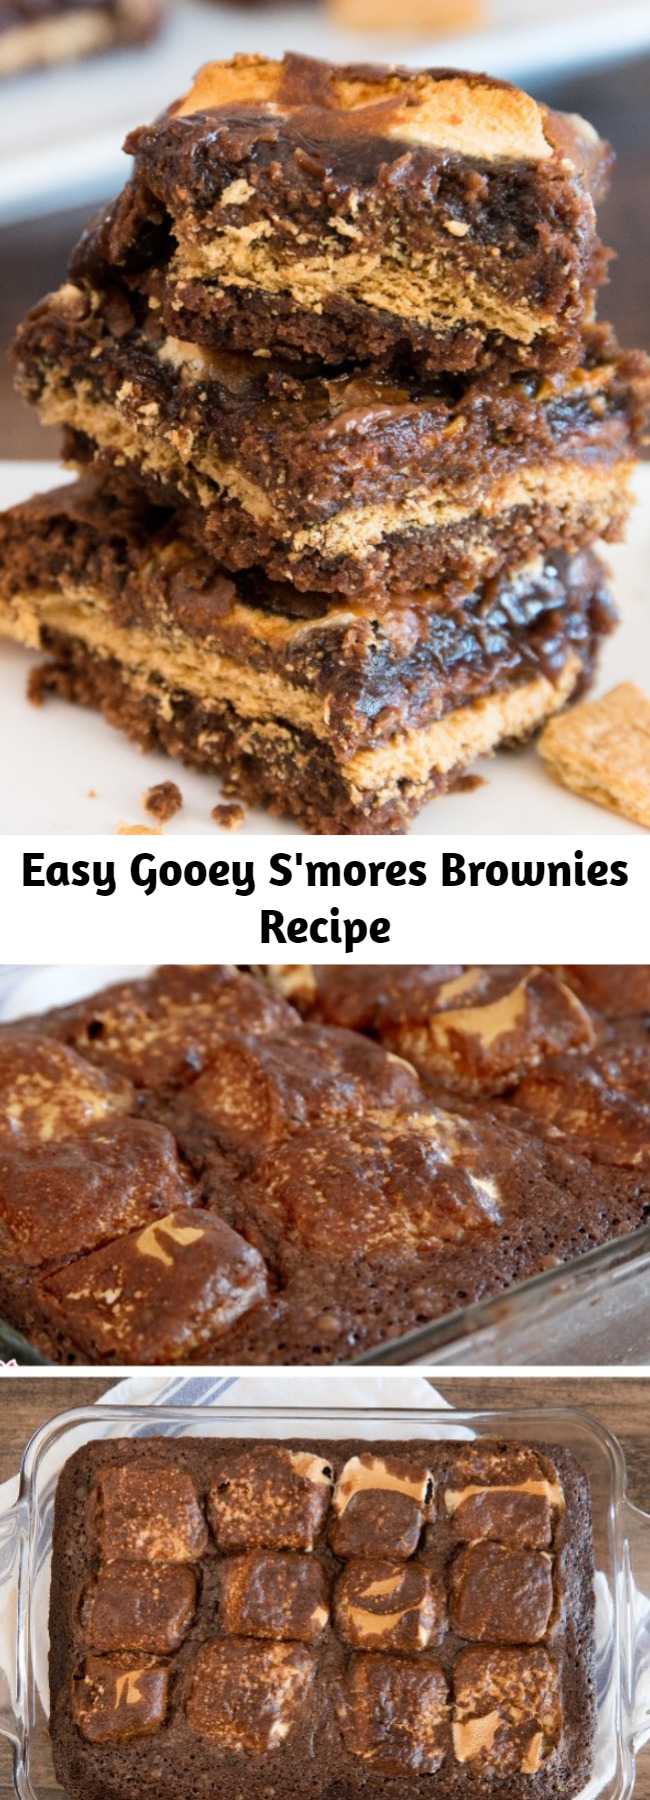 Easy Gooey S'mores Brownies Recipe - S’mores Brownies are chewy, moist and ooey gooey good! This easy recipe combines brownies with graham crackers, marshmallows for a decadent dessert nobody can resist! Perfect for game day, parties, holidays and everyday indulgences.